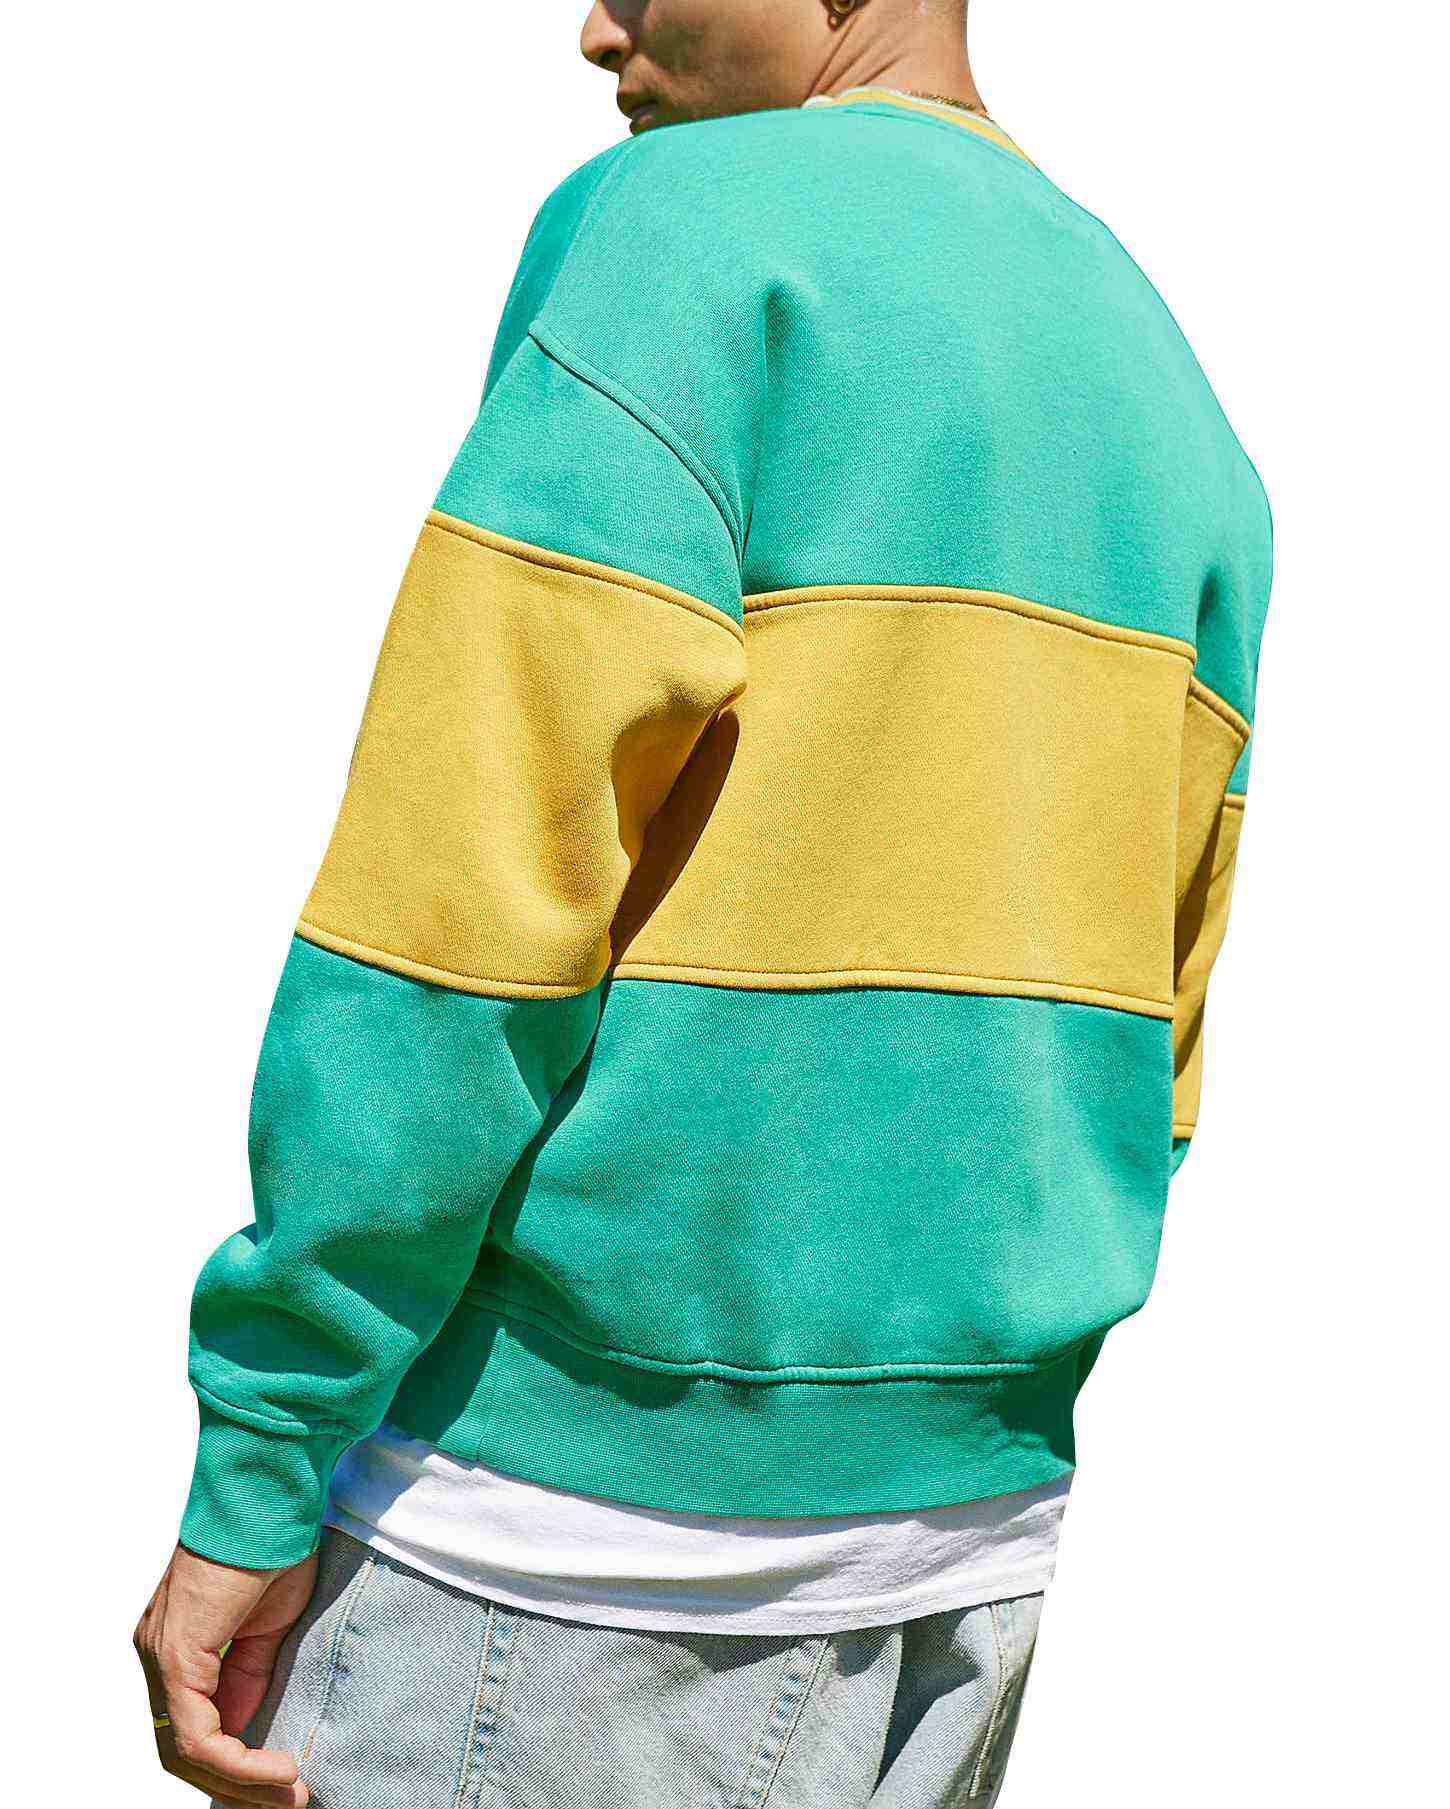 OEM Manufacturer Oversized Heavy Weight Cotton Fleece Crew Neck Pullover Green And Yellow Colorblock Sweatshirts